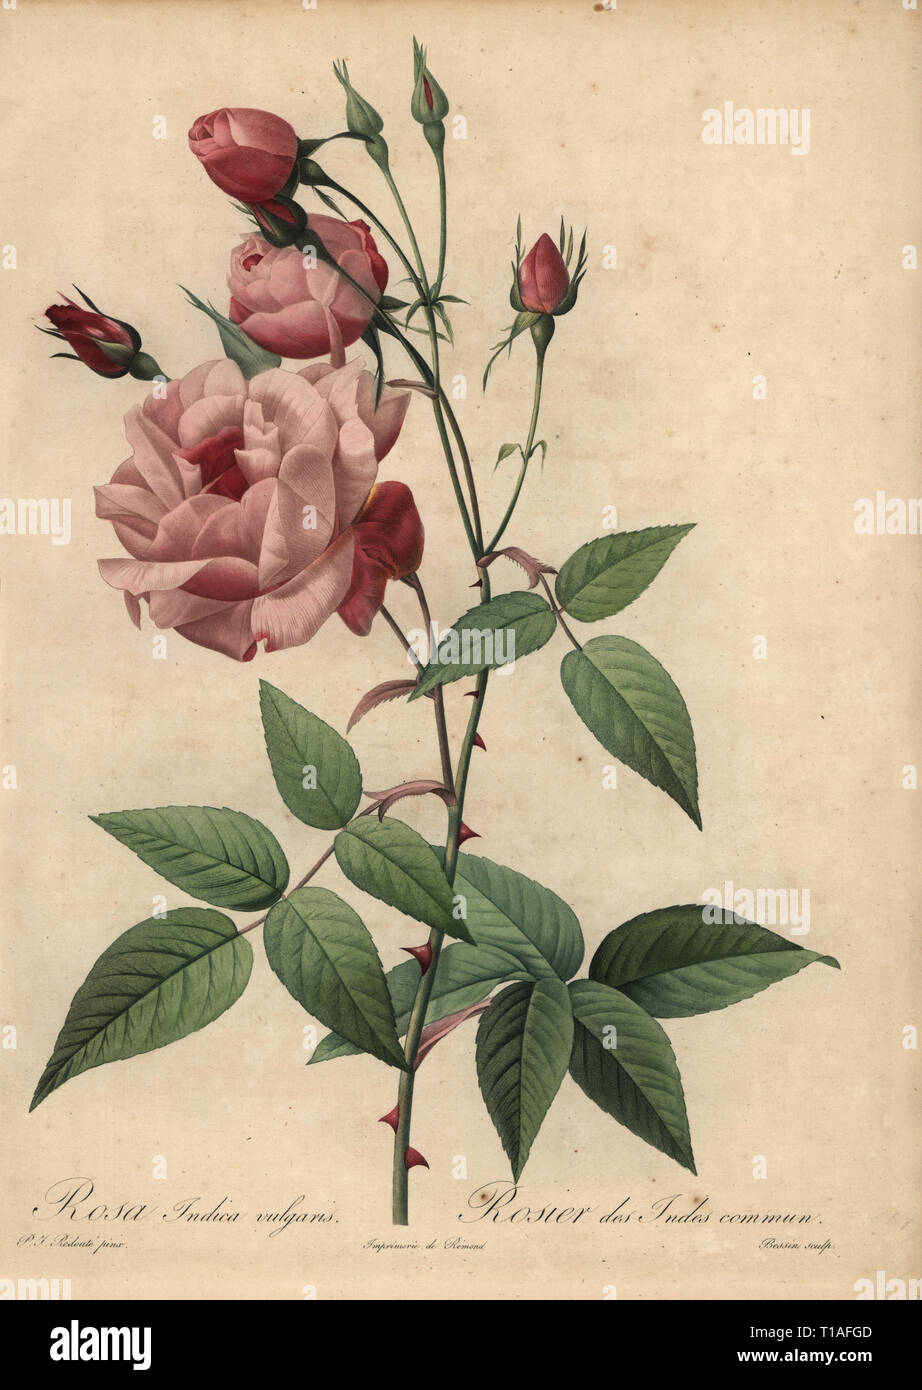 Pink China rose, Rosa chinensis. Rosa indica vulgaris, Rosier des Indes commun. Stipple copperplate engraving by Rosine-Antoinette Bessin handcoloured a la poupee after a botanical illustration by Pierre-Joseph Redoute from the first folio edition of Les Roses, Firmin Didot, Paris, 1817. Stock Photo